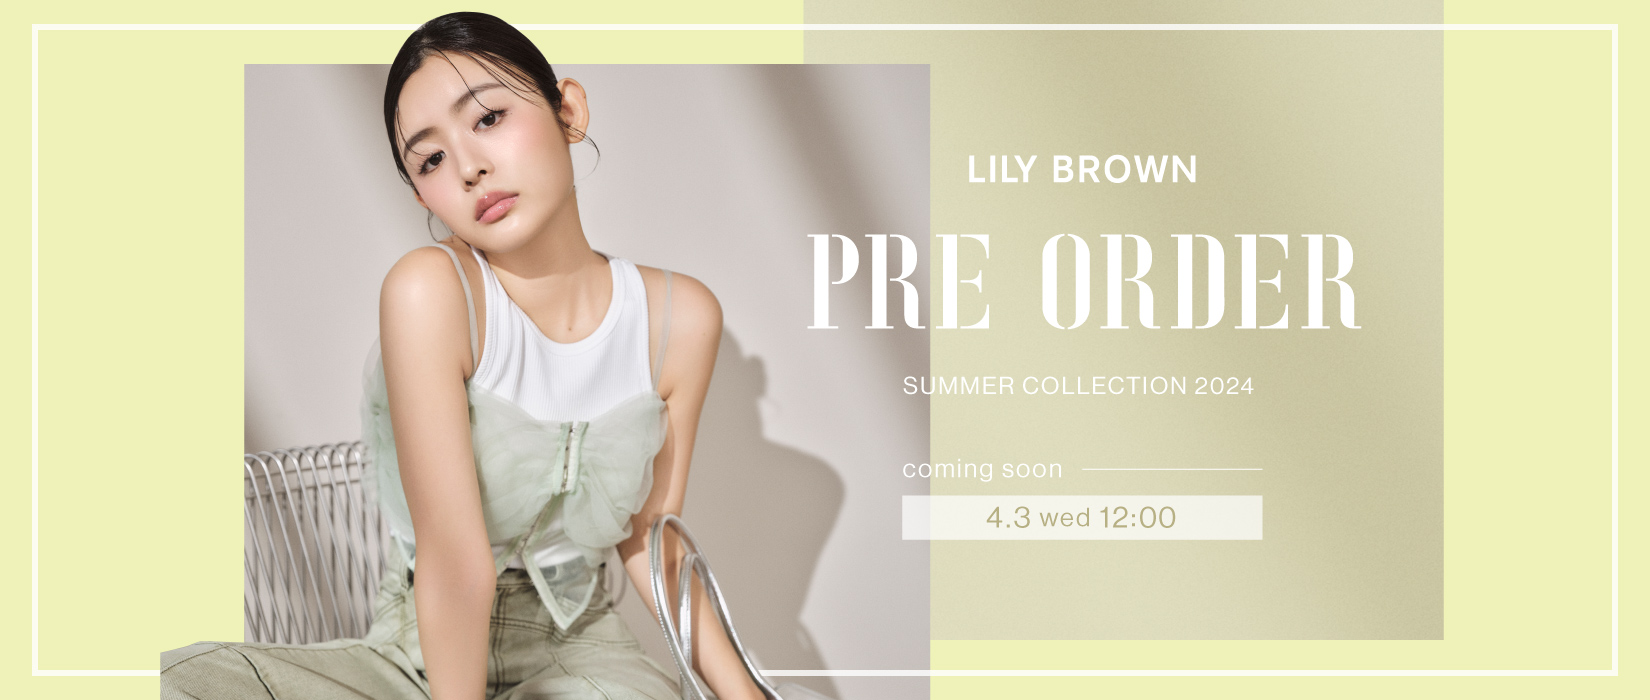 LILY BROWN 2024 SUMMER COLLECTION 先行予約アイテムを公開！4/3(水) 正午、予約スタート